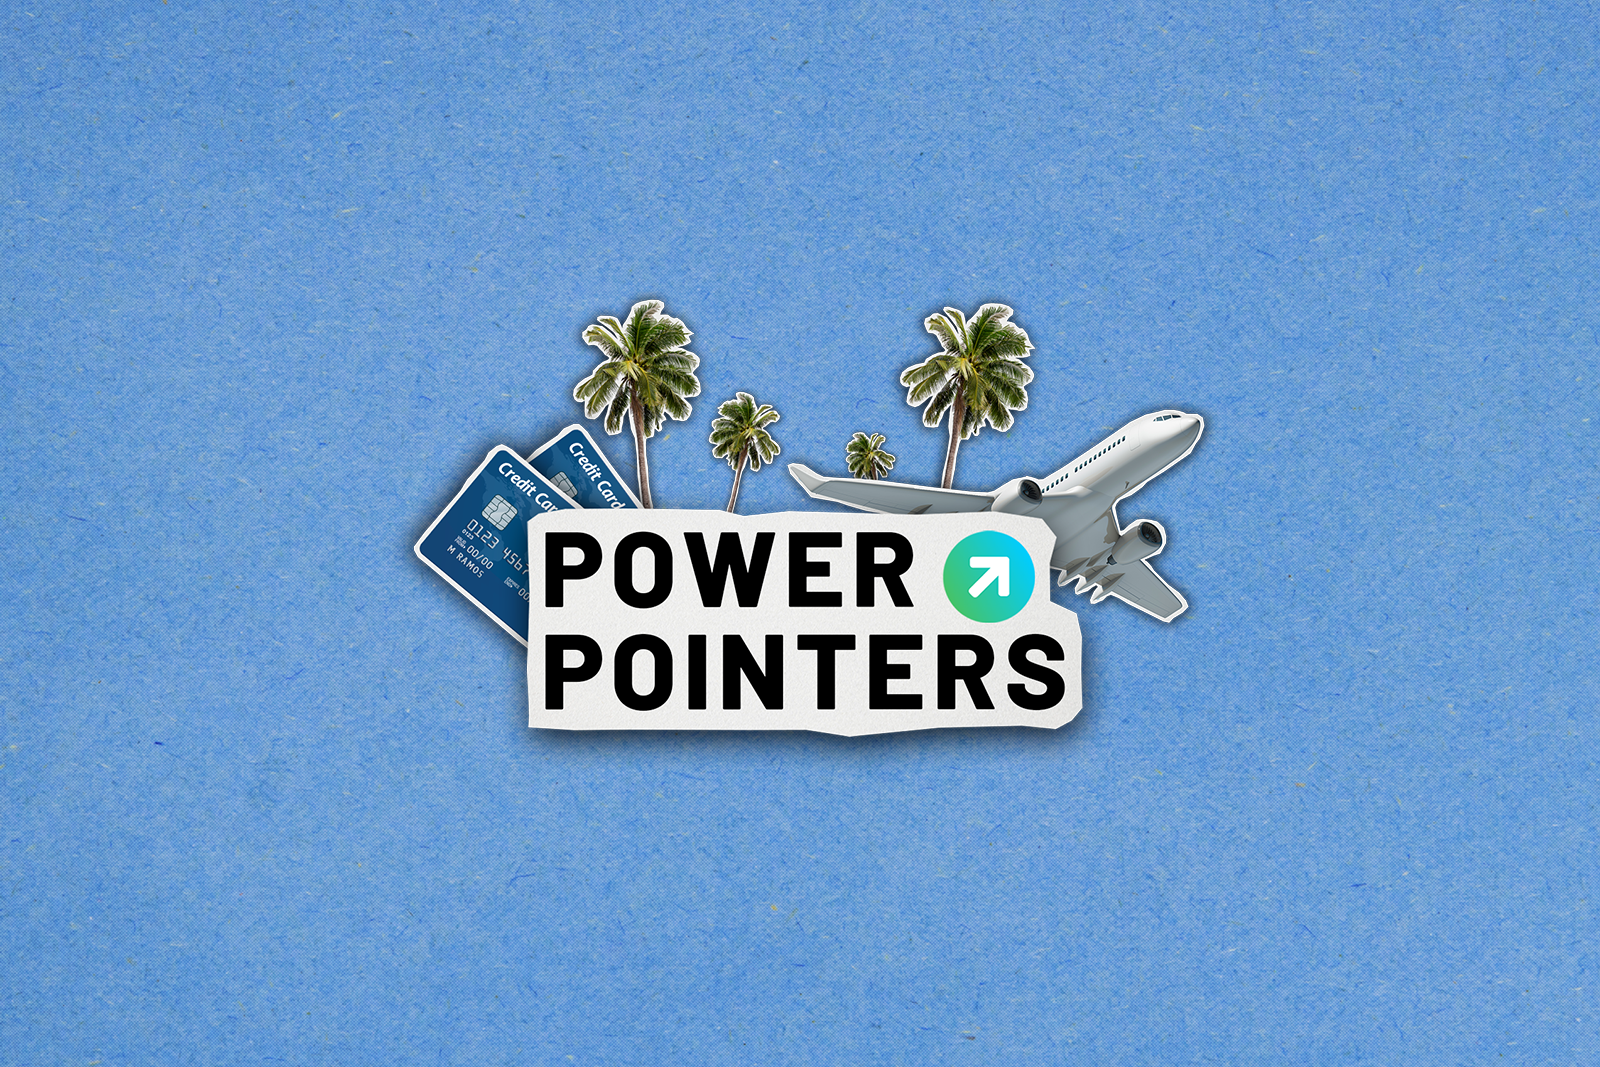 Power pointers show graphic